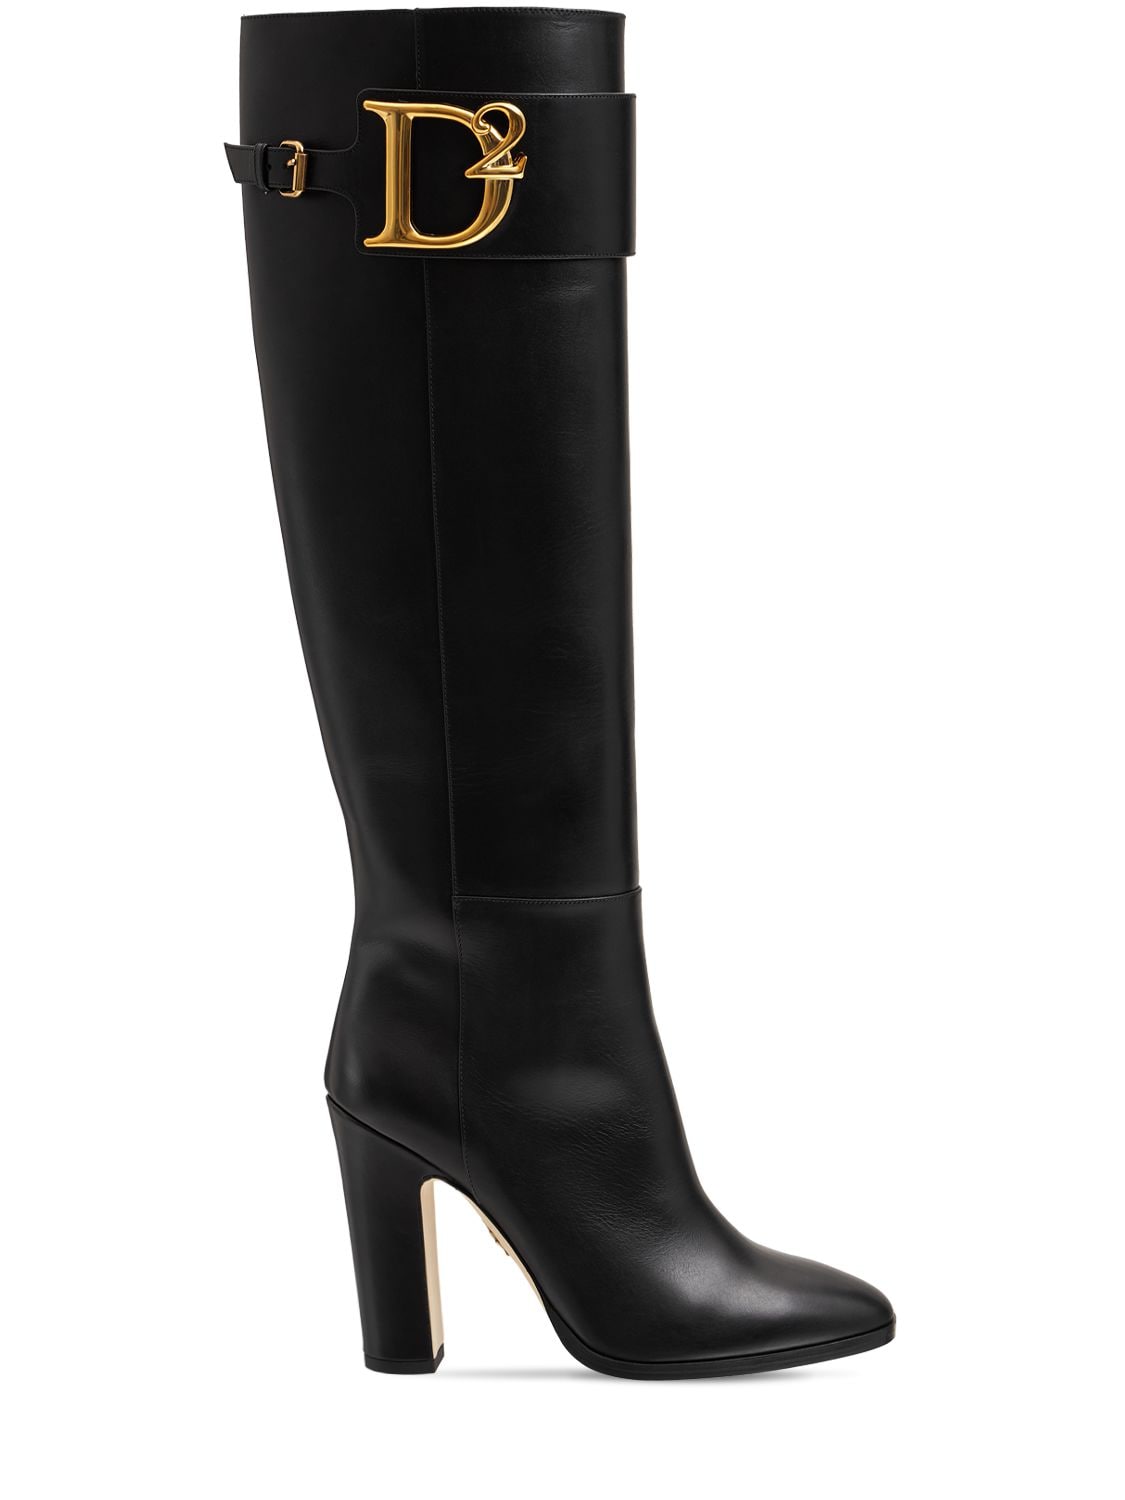 100mm D2 Statement Leather Tall Boots